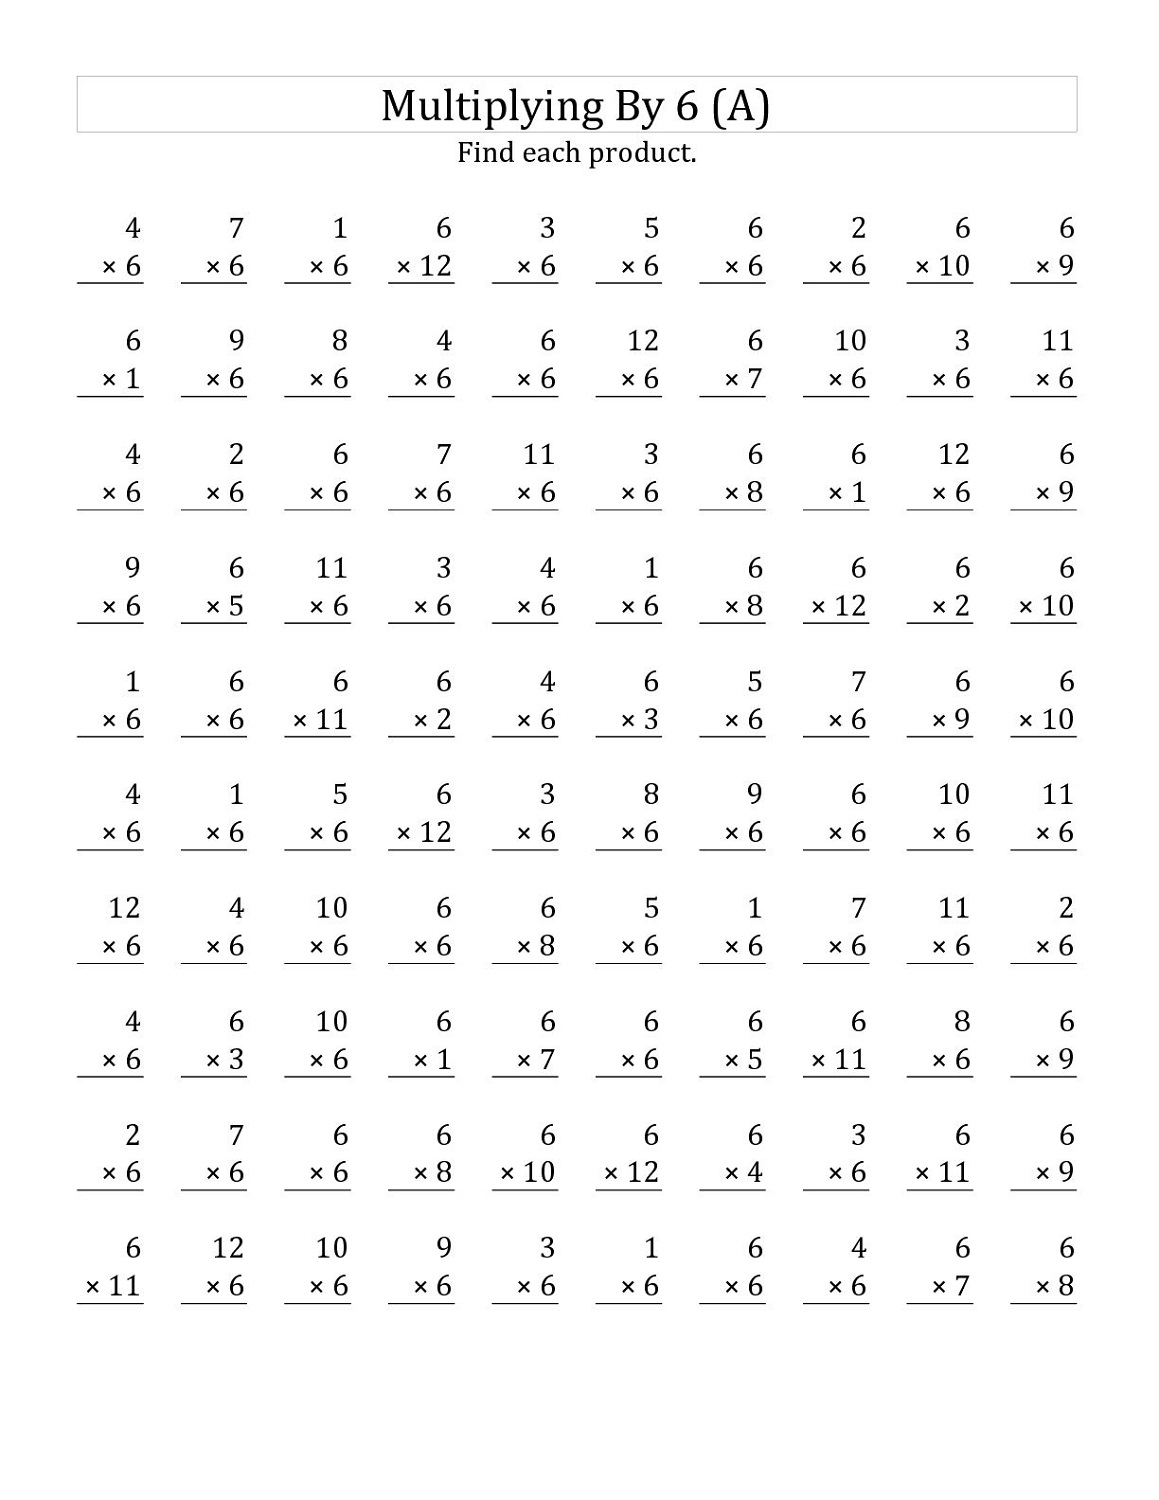 11 Times Table Worksheets  Activity Shelter Intended For Multiplying By 6 Worksheet